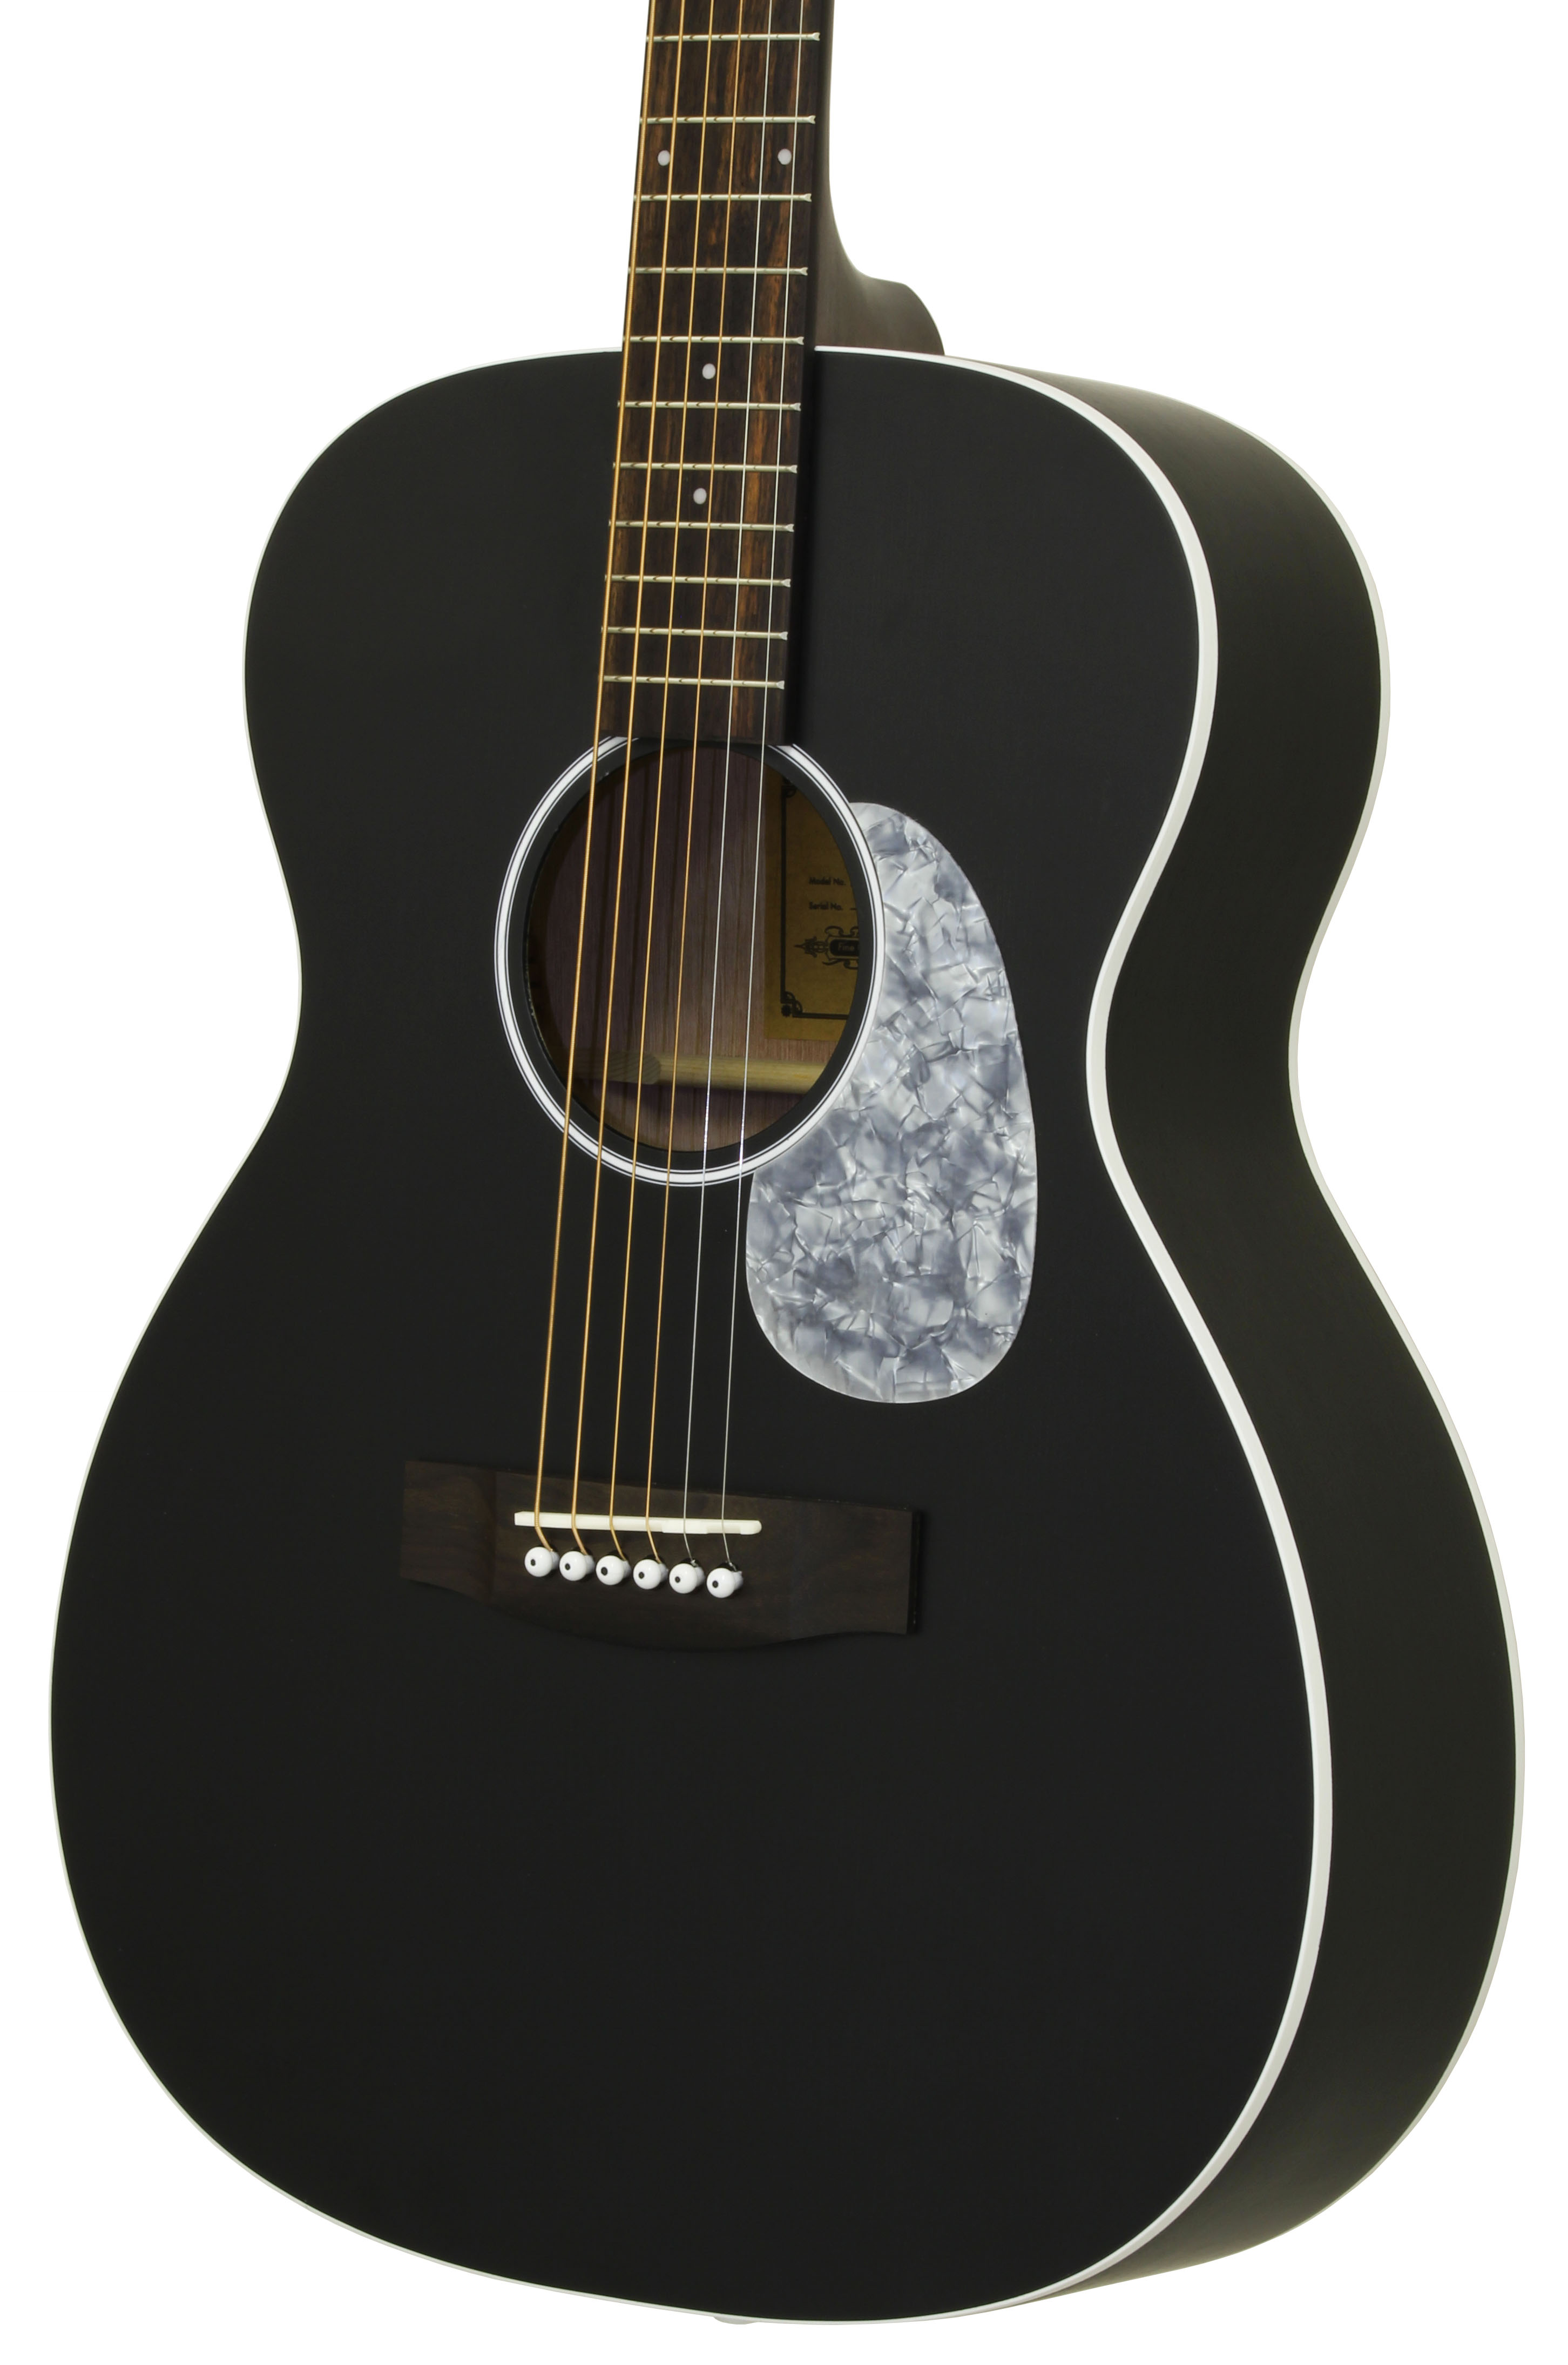 ARIA 101 Urban Player, stained black